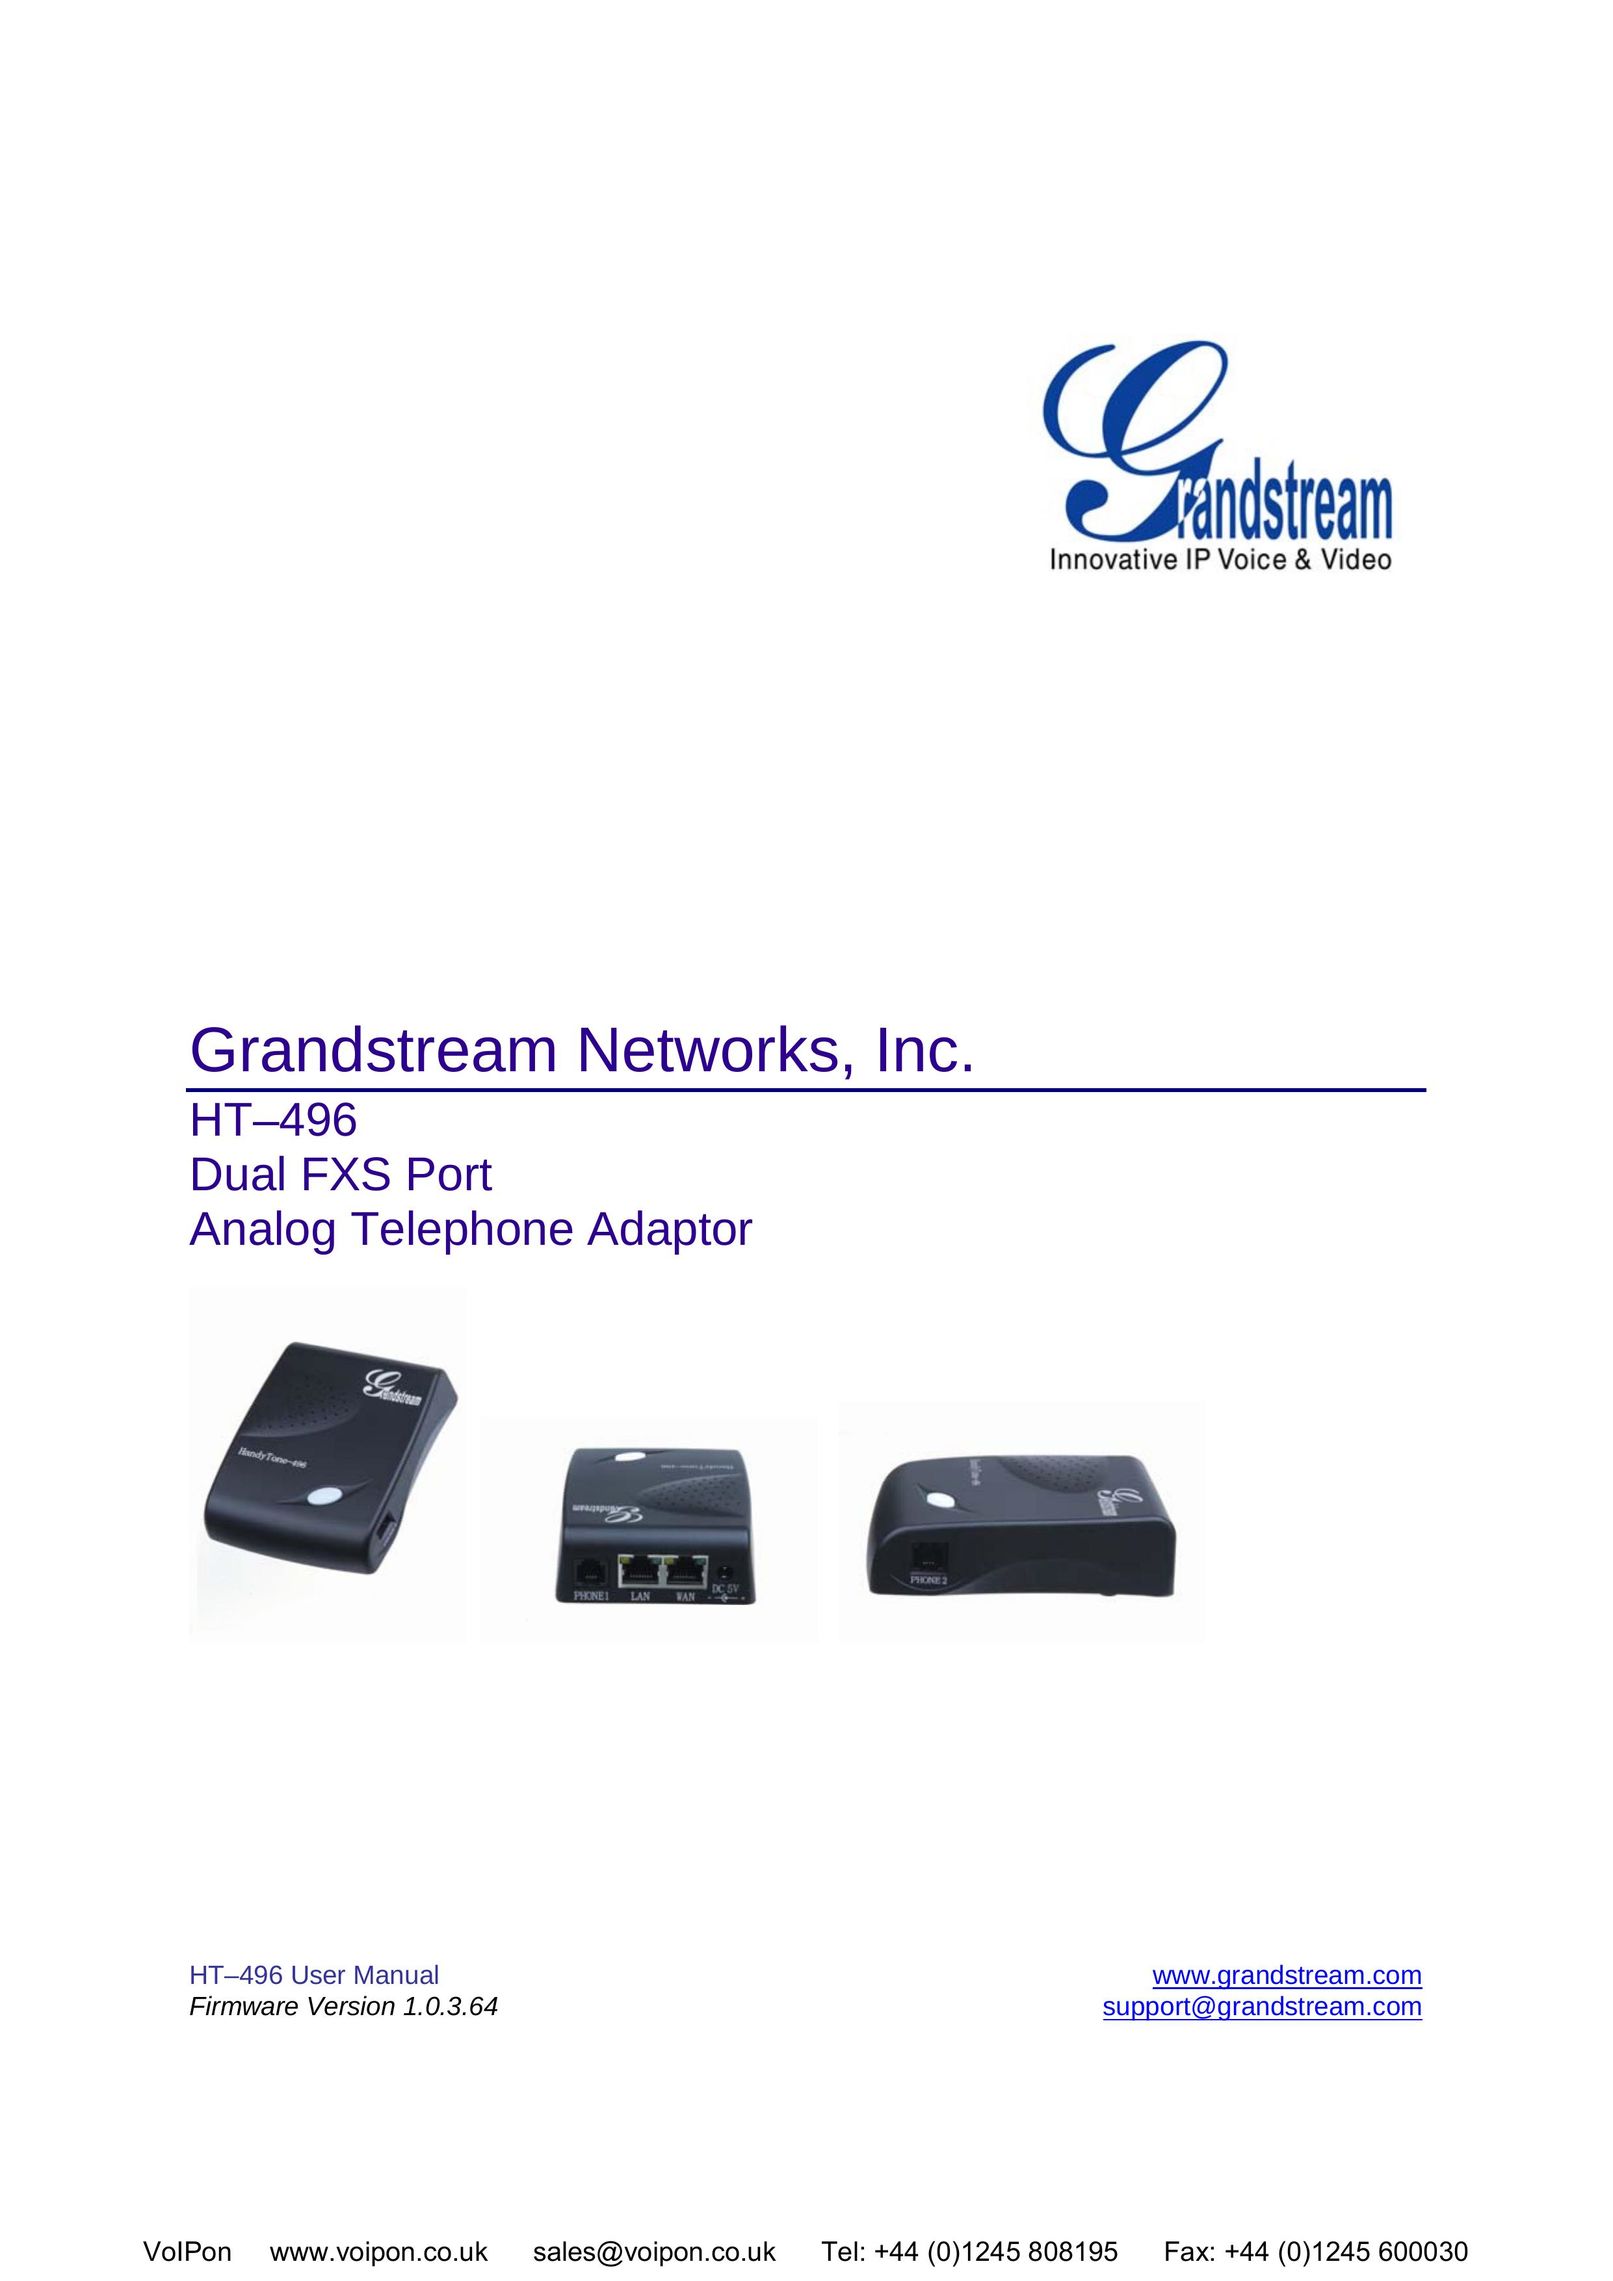 Grandstream Networks HT-496 Telephone Accessories User Manual